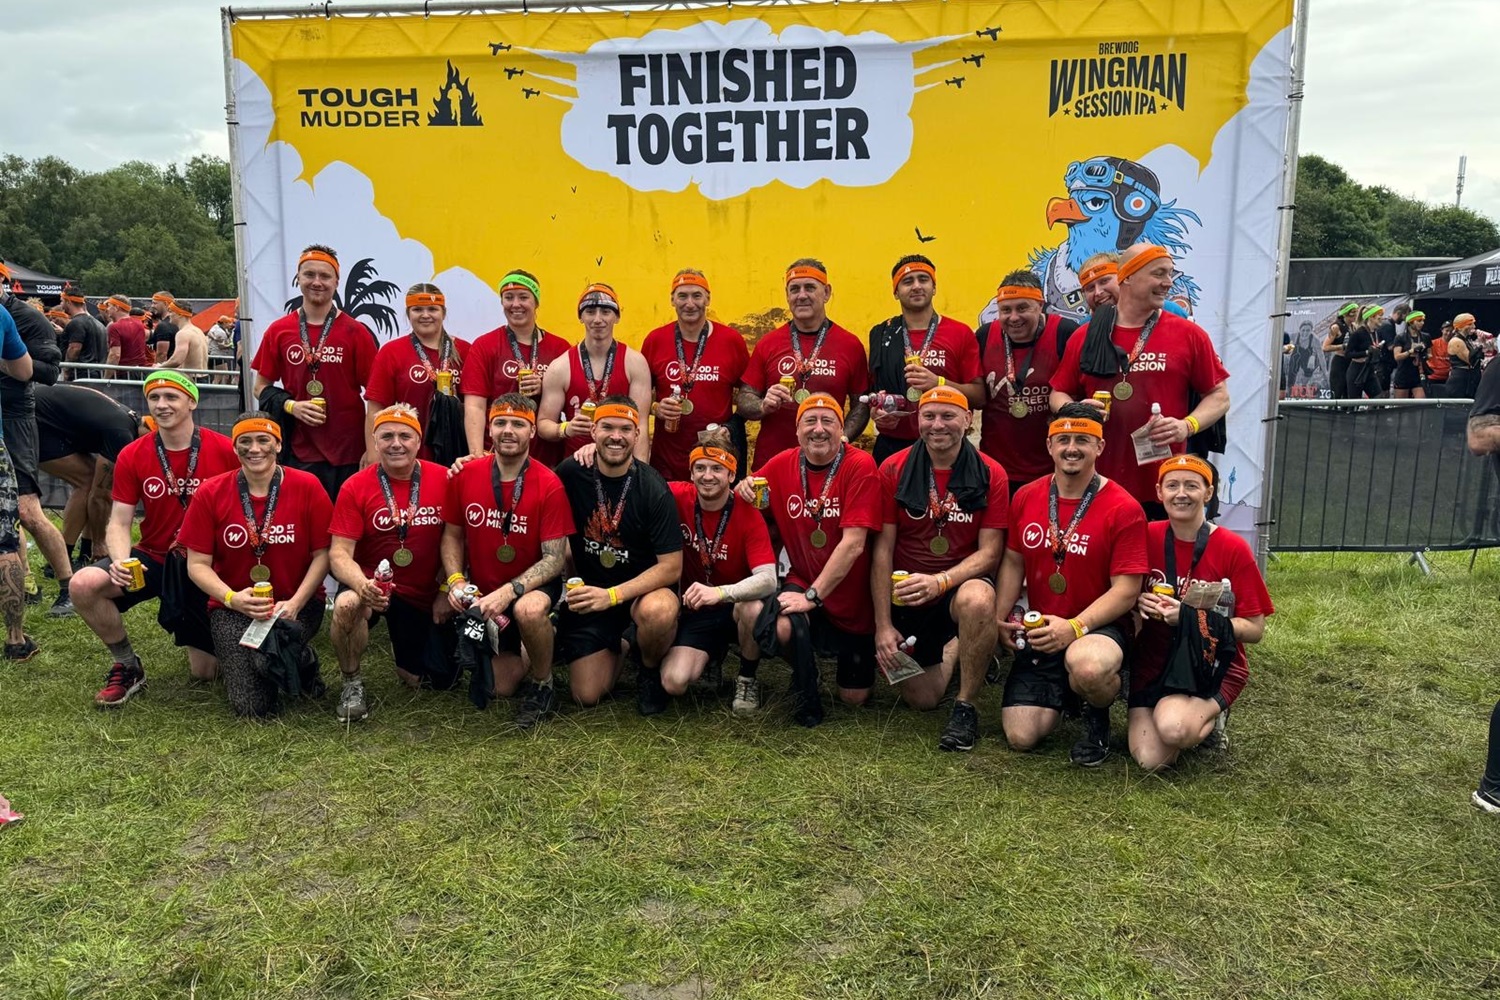 Tough Mudder helps Warden raise £6,700 for Wood Street Mission